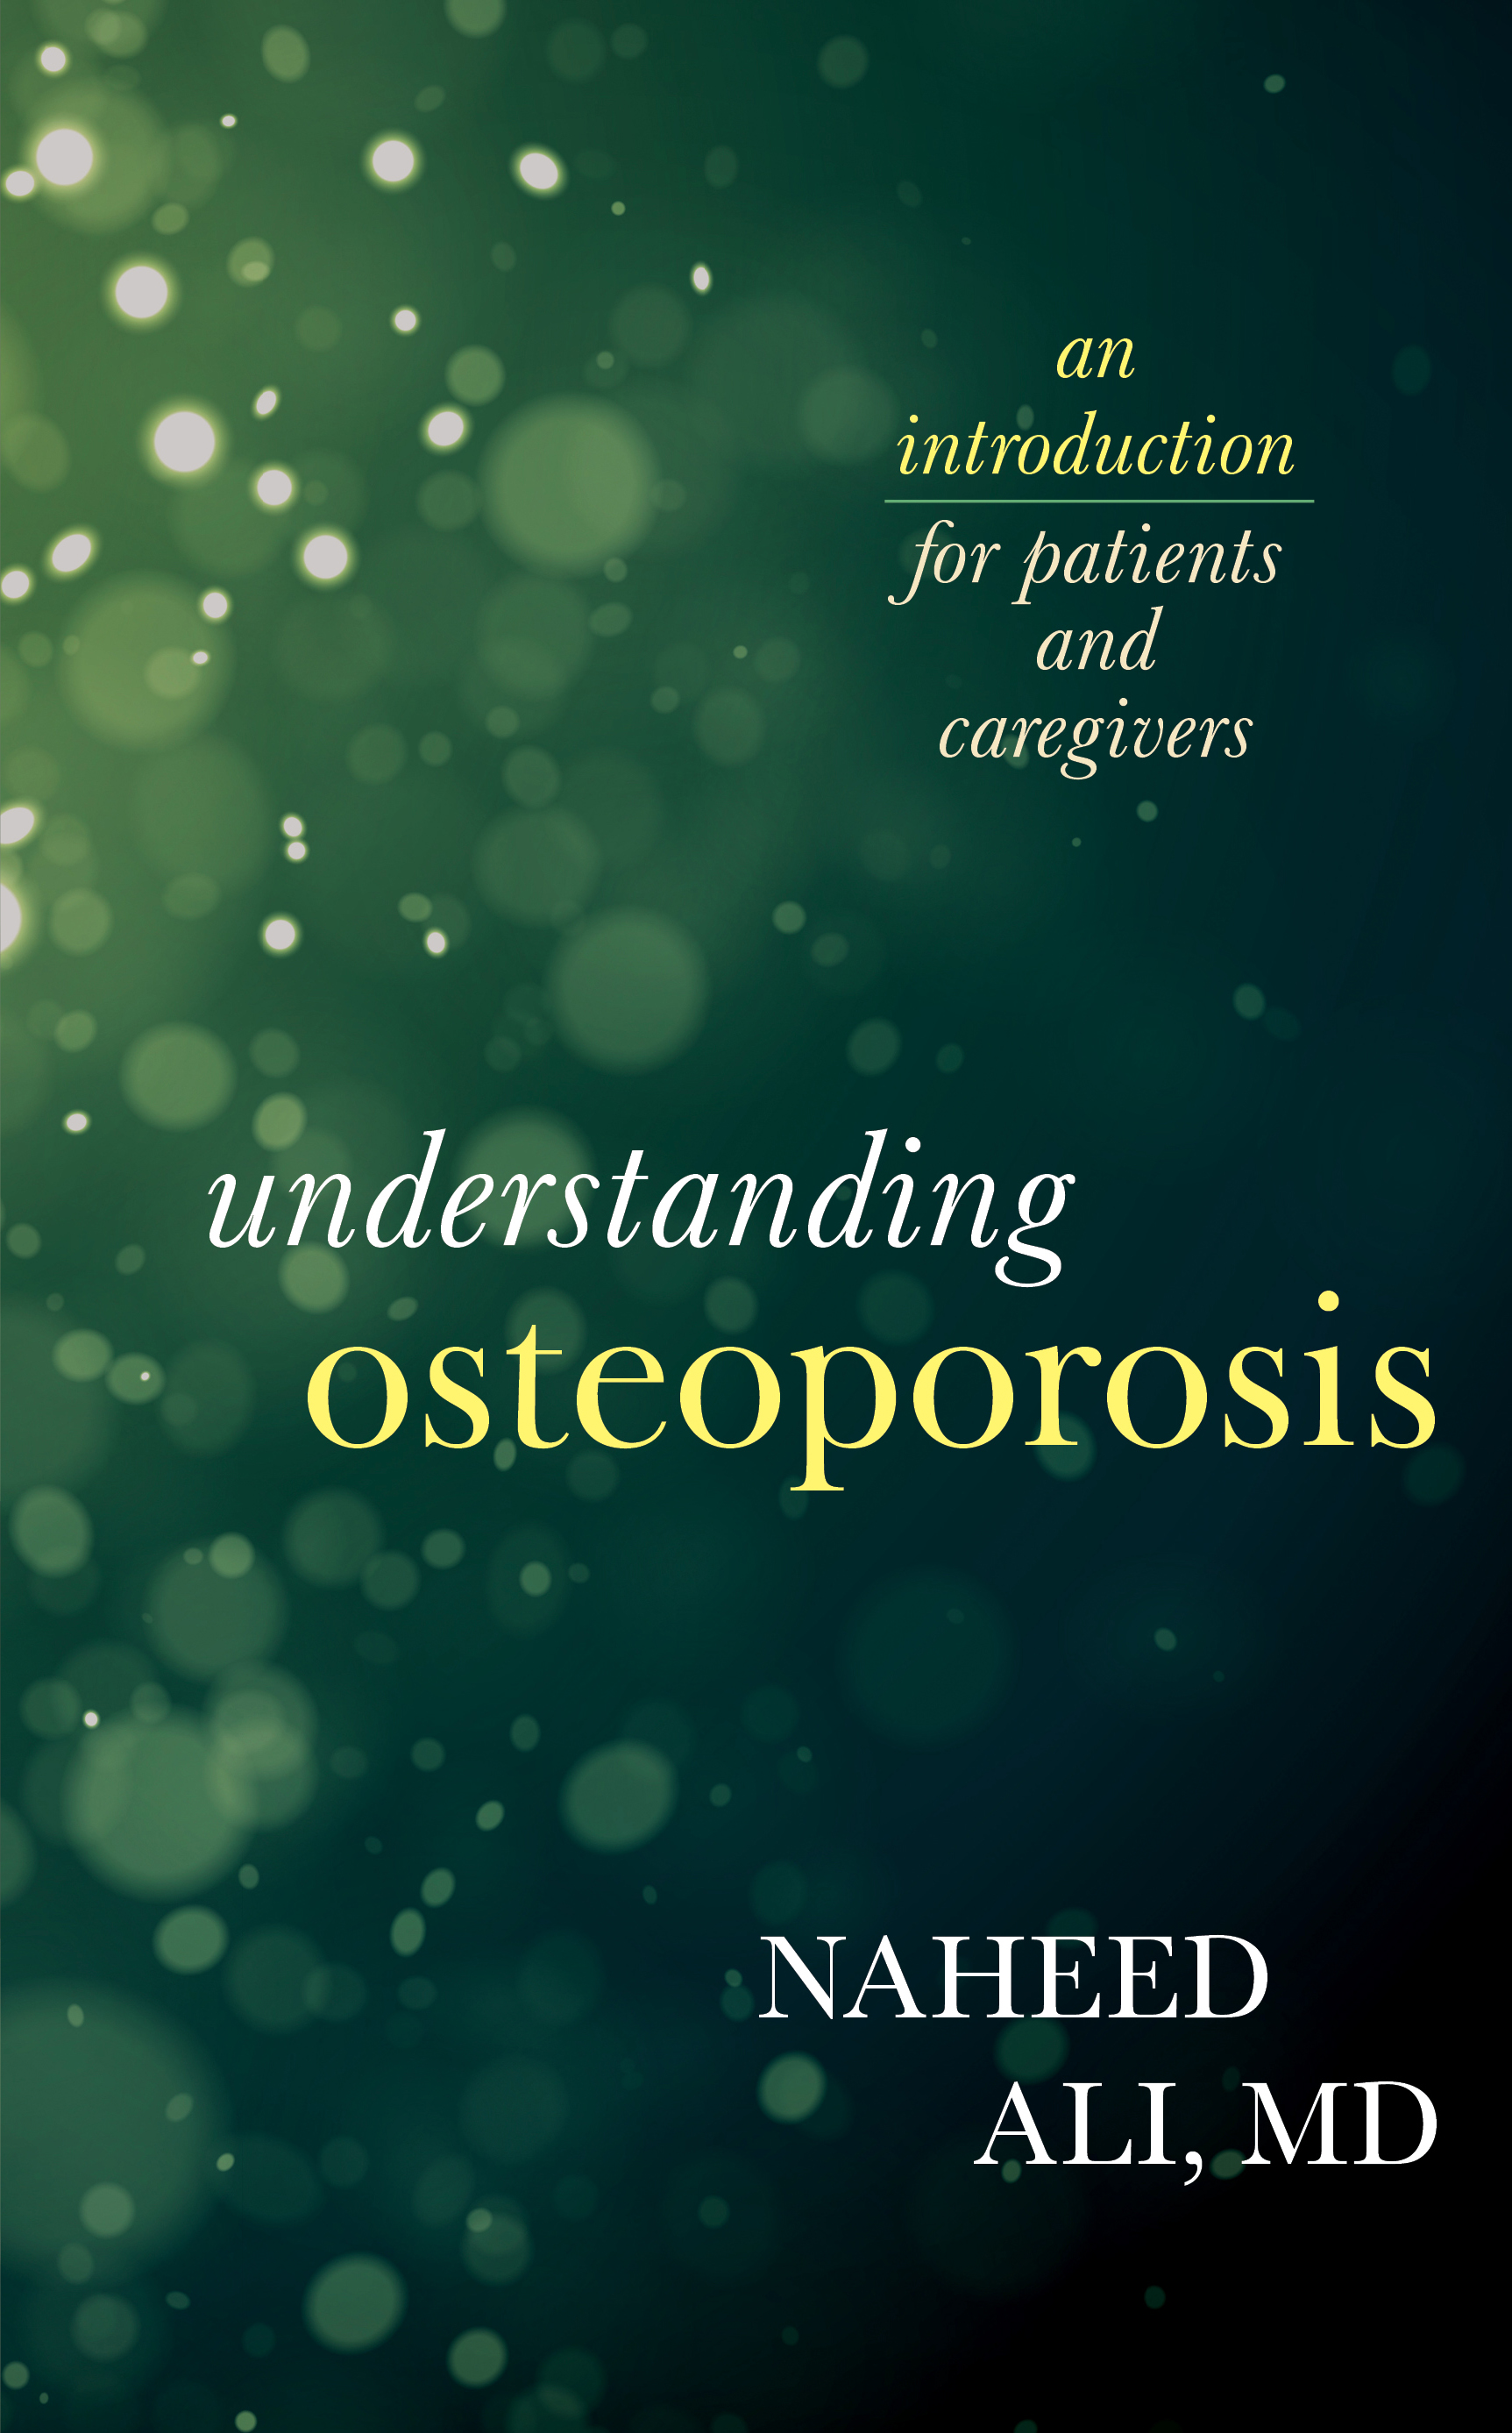 Understanding Osteoporosis An Introduction for Patients and Caregivers cover image